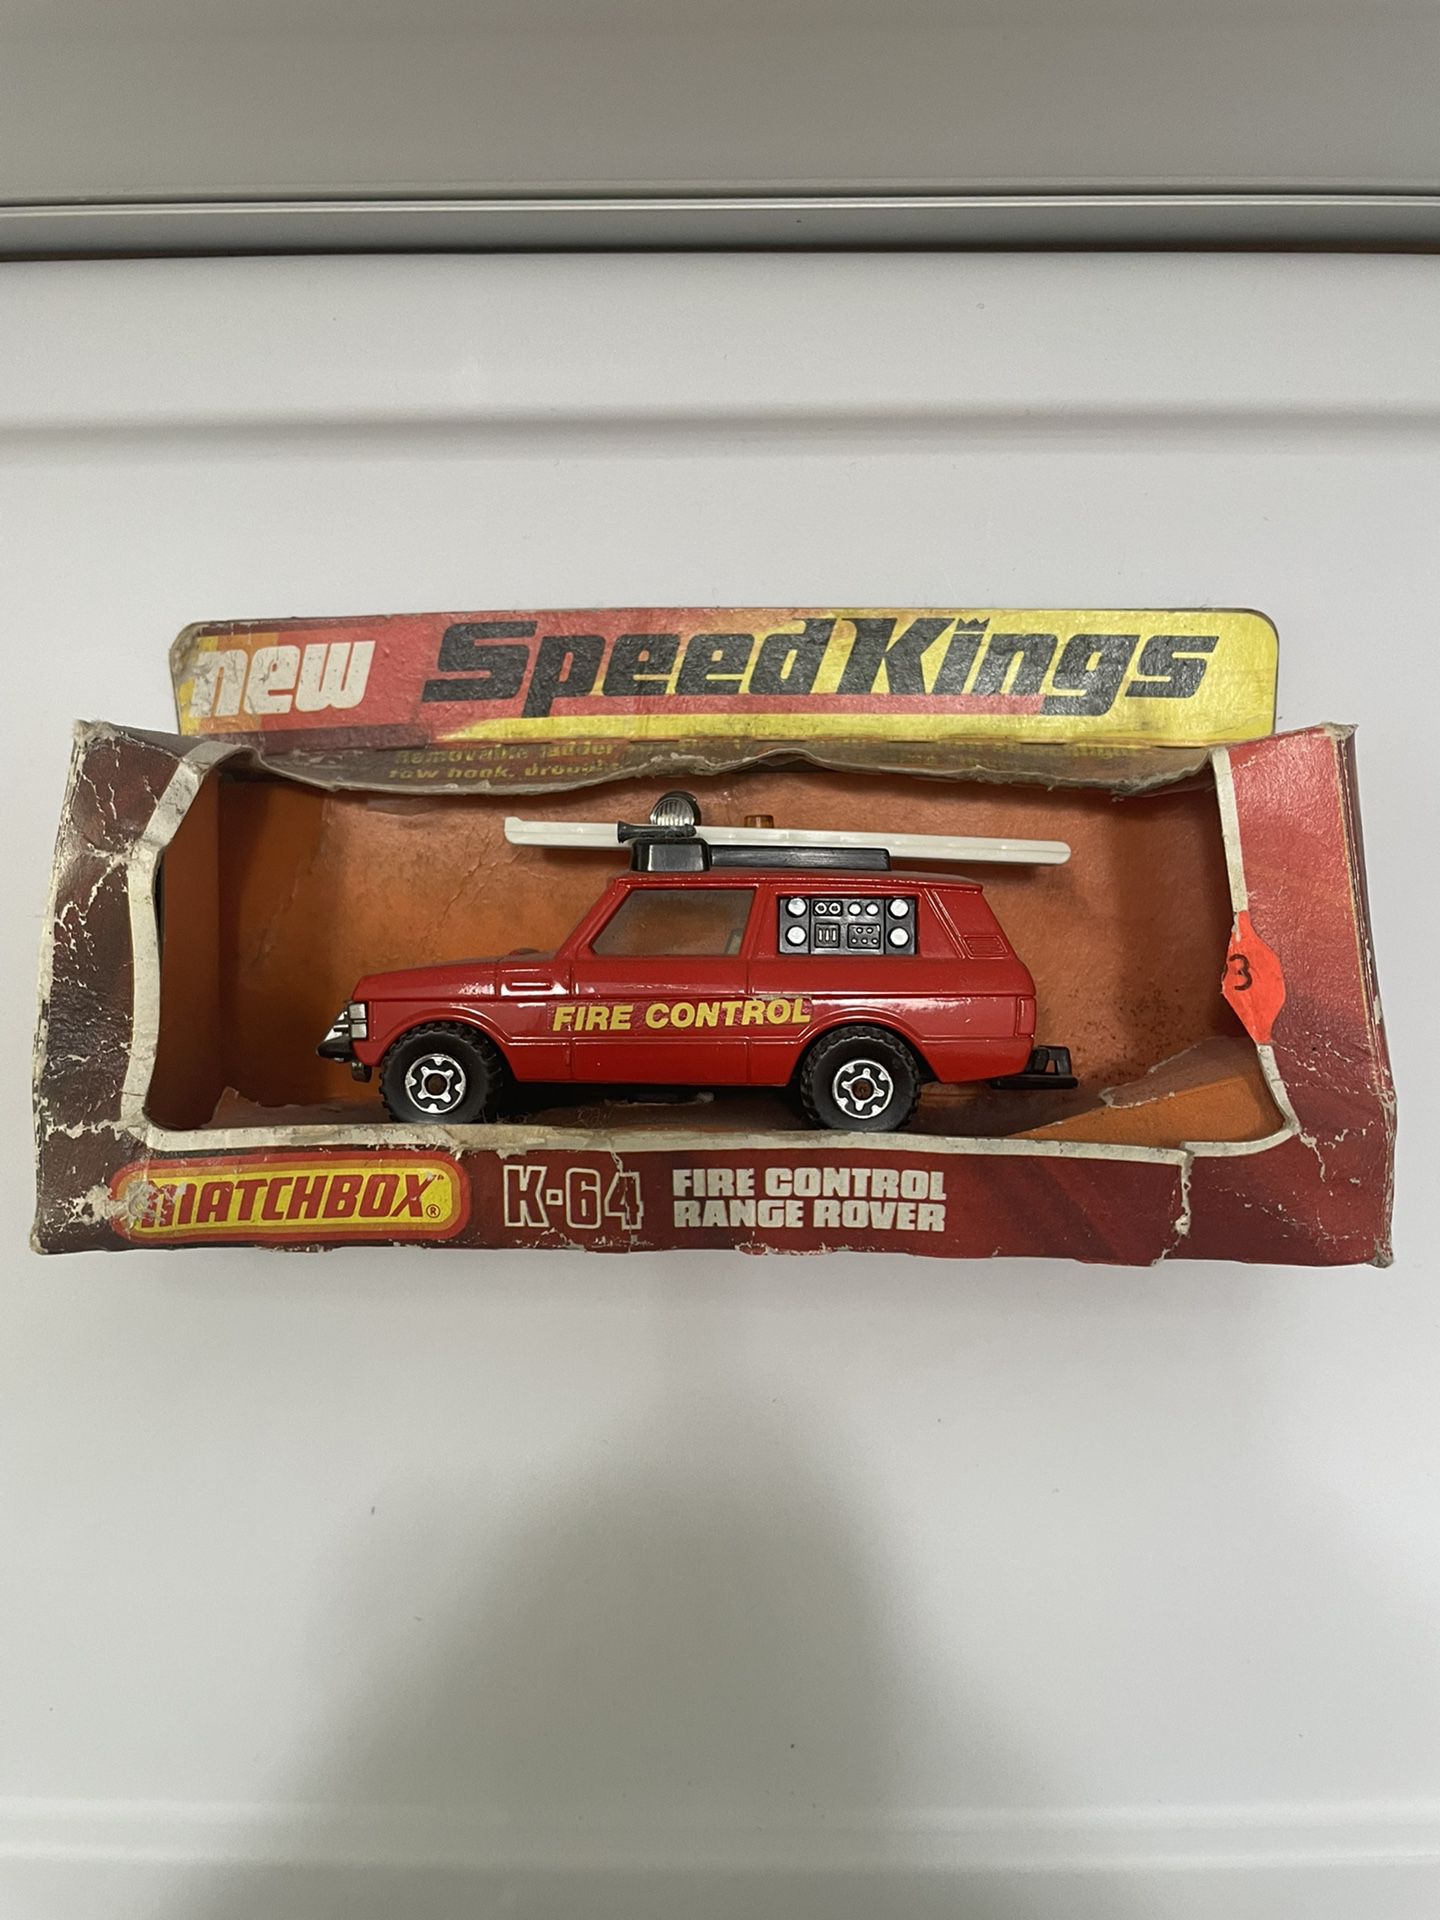 1970s Vintage Matchbox Superkings SK64 Fire Control Truck Toy Collectible England